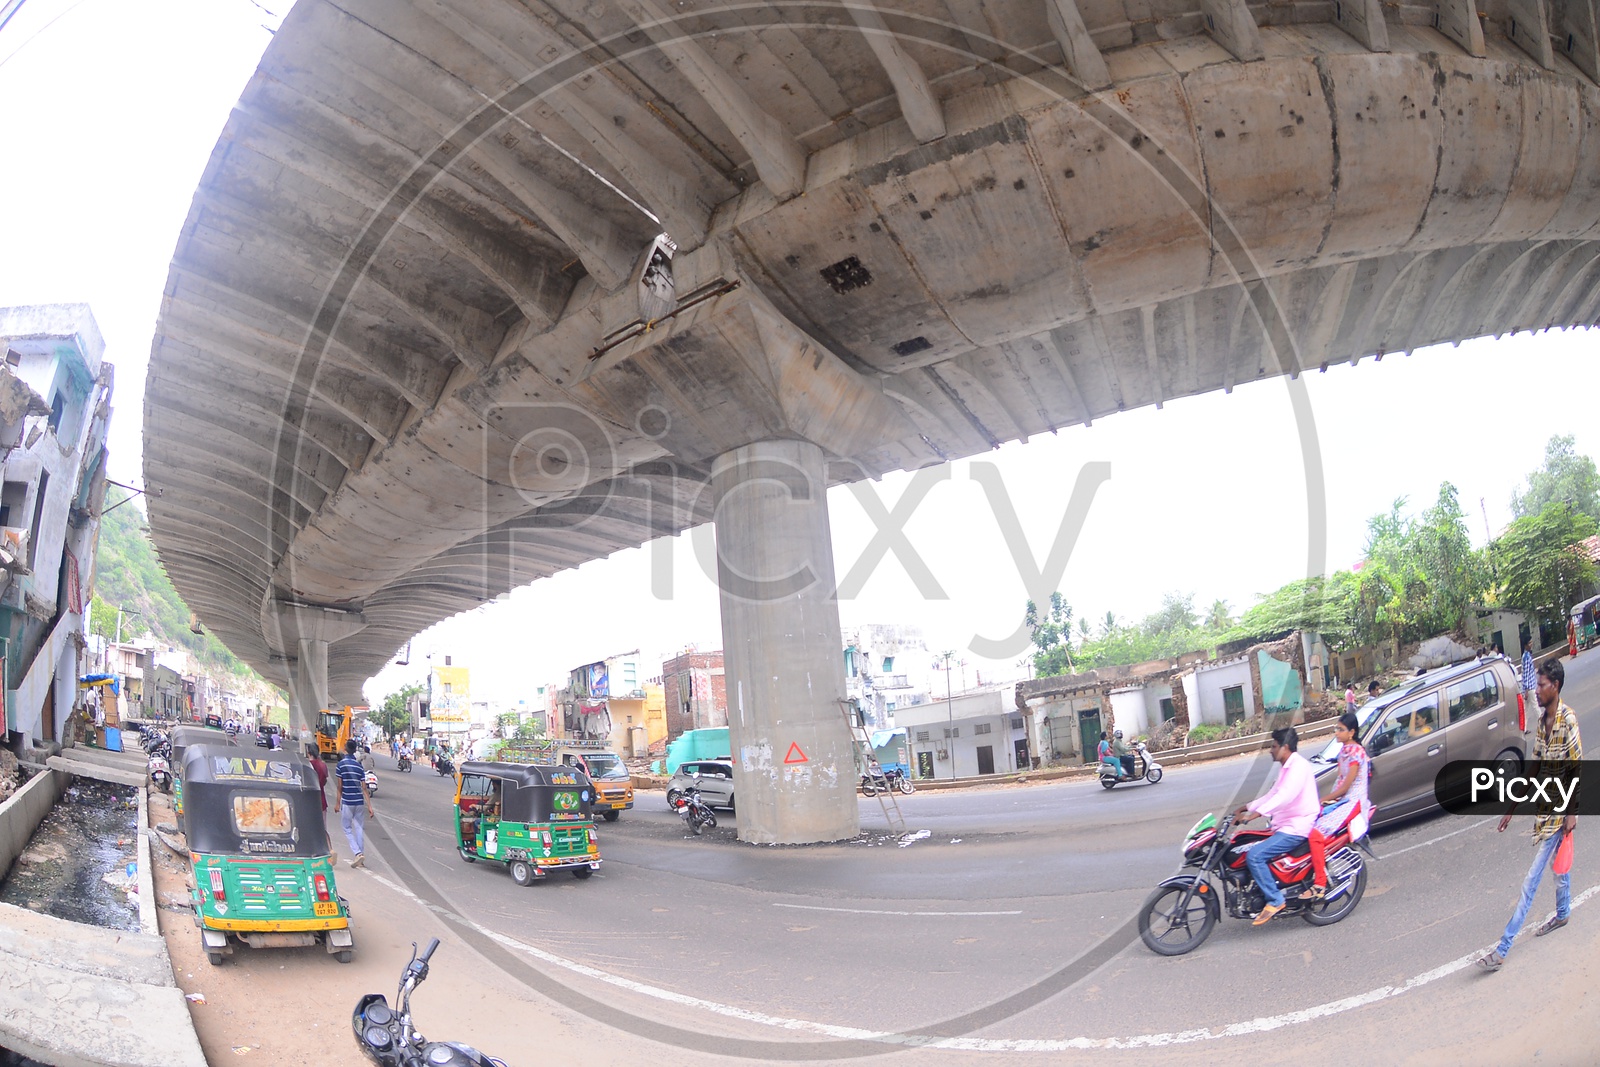 A View Of a Flyover With Vehicles Commuting On Roads Under The Flyover